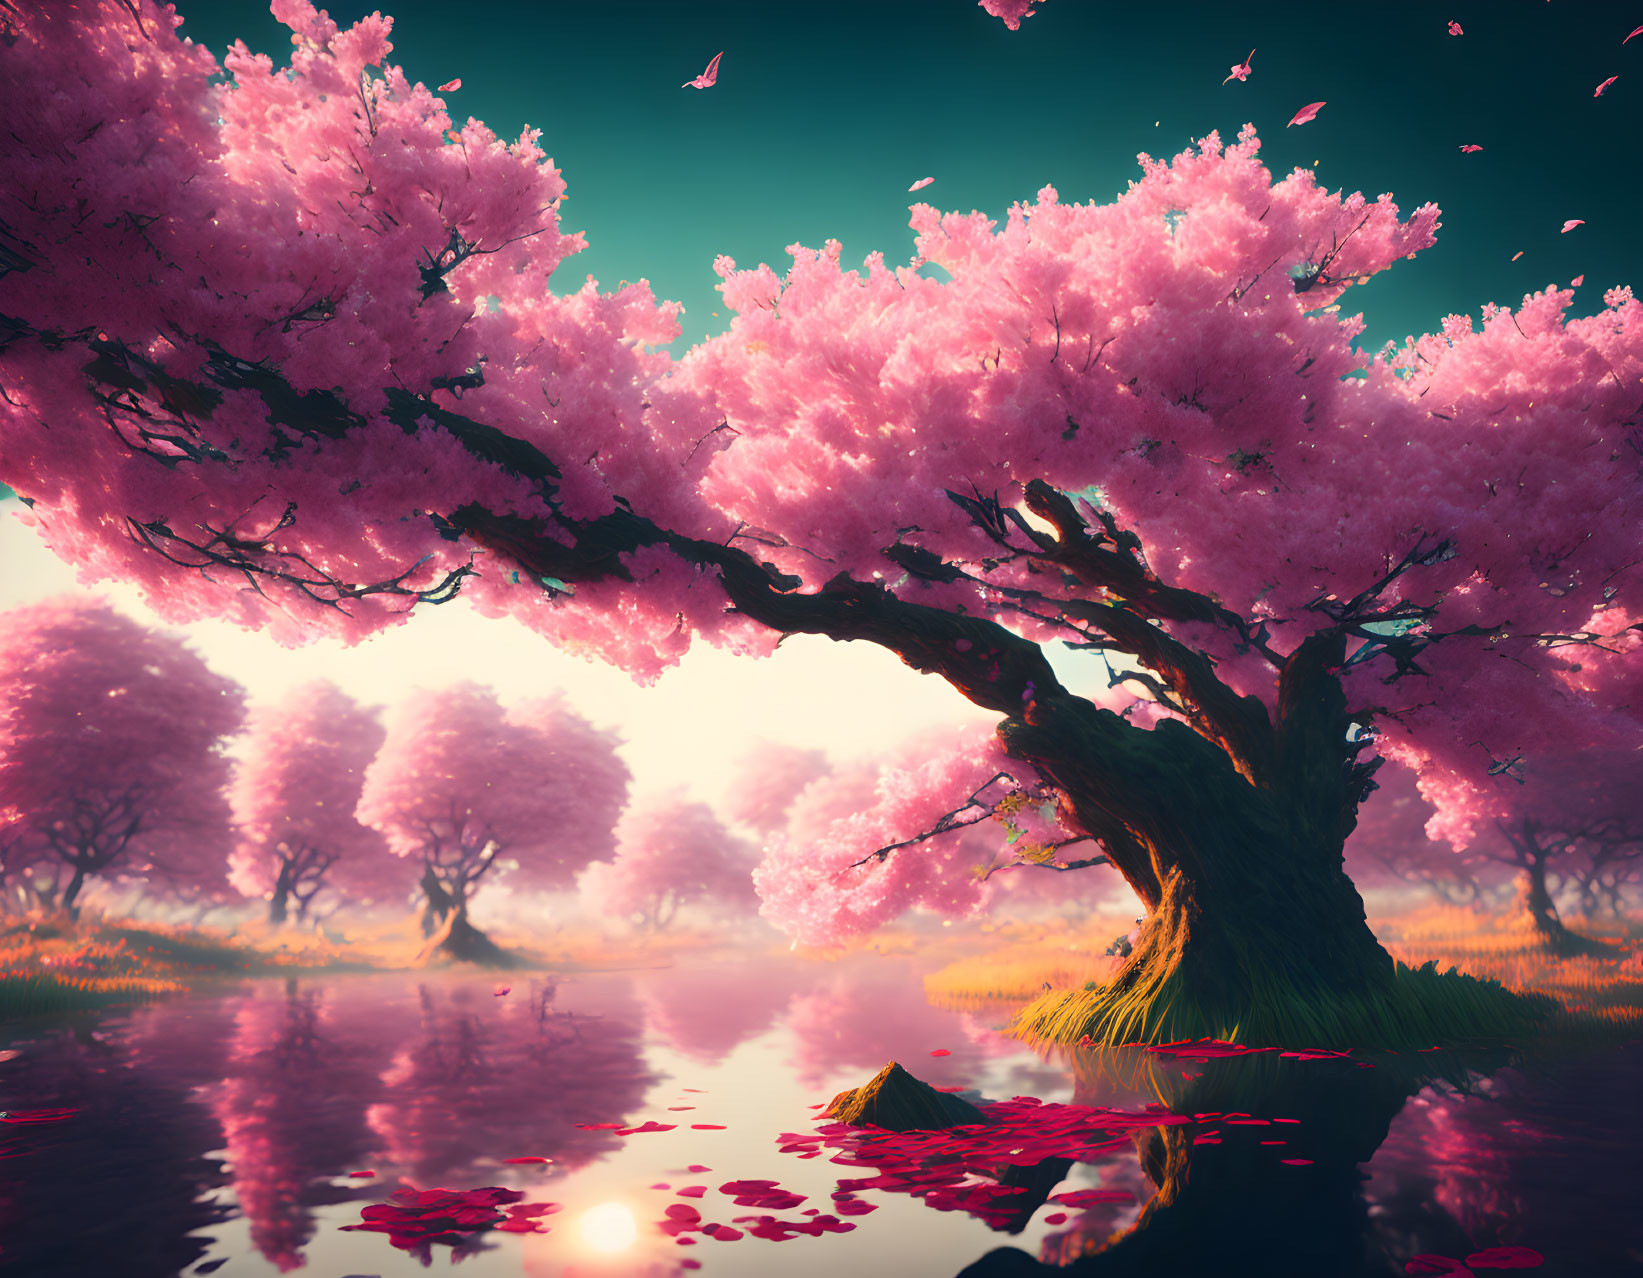 Tranquil landscape with majestic cherry blossom tree and vibrant pink flowers